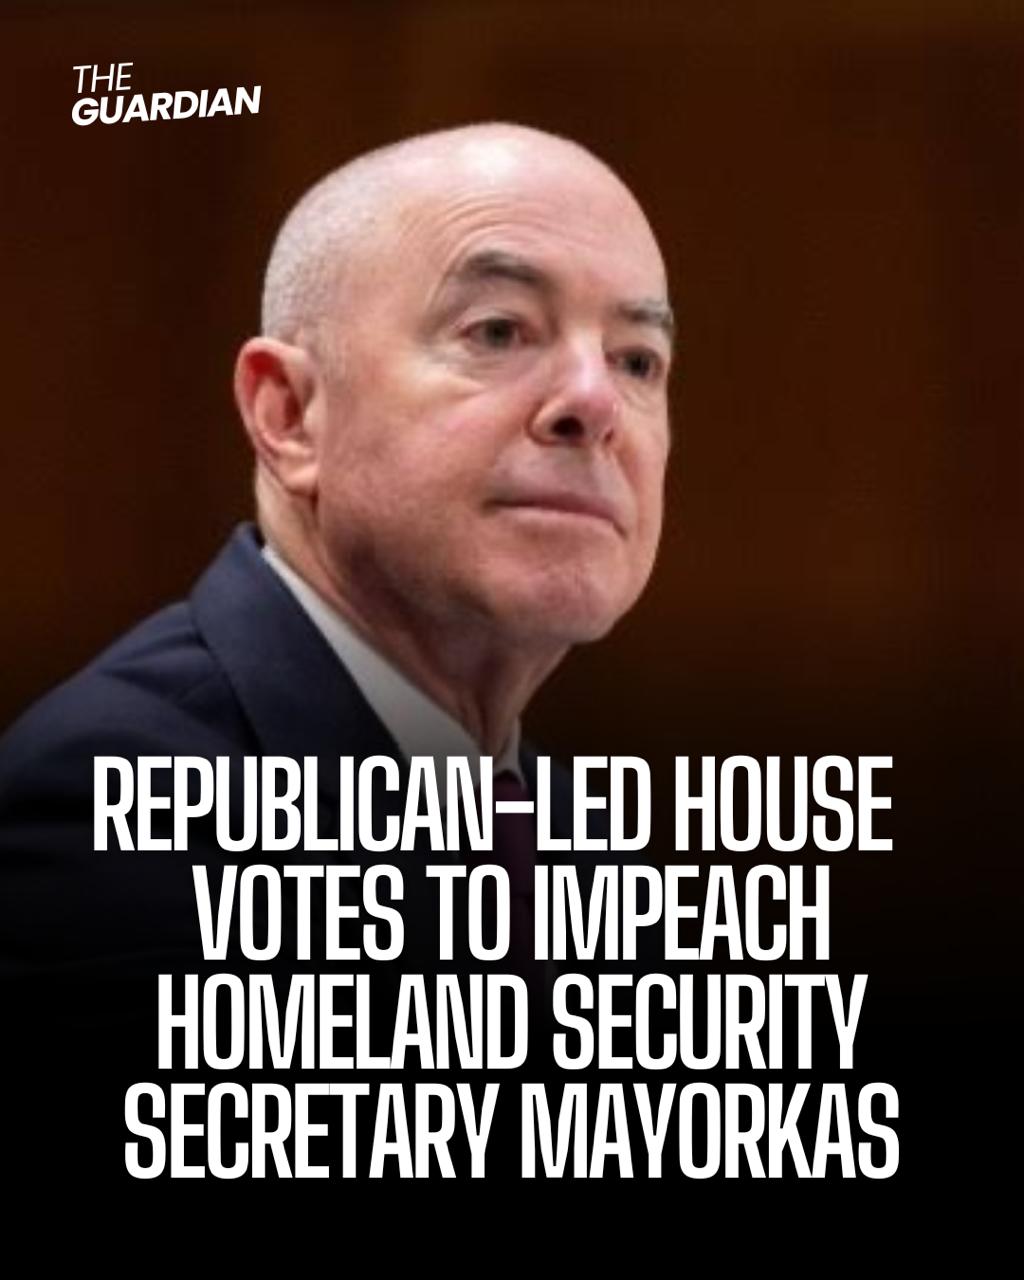 The Republican-led House of Representatives has fallen in a knife-edge voting to impeach Homeland Security Secretary Alejandro Mayorkas over the migrant situation at the US-Mexico border.